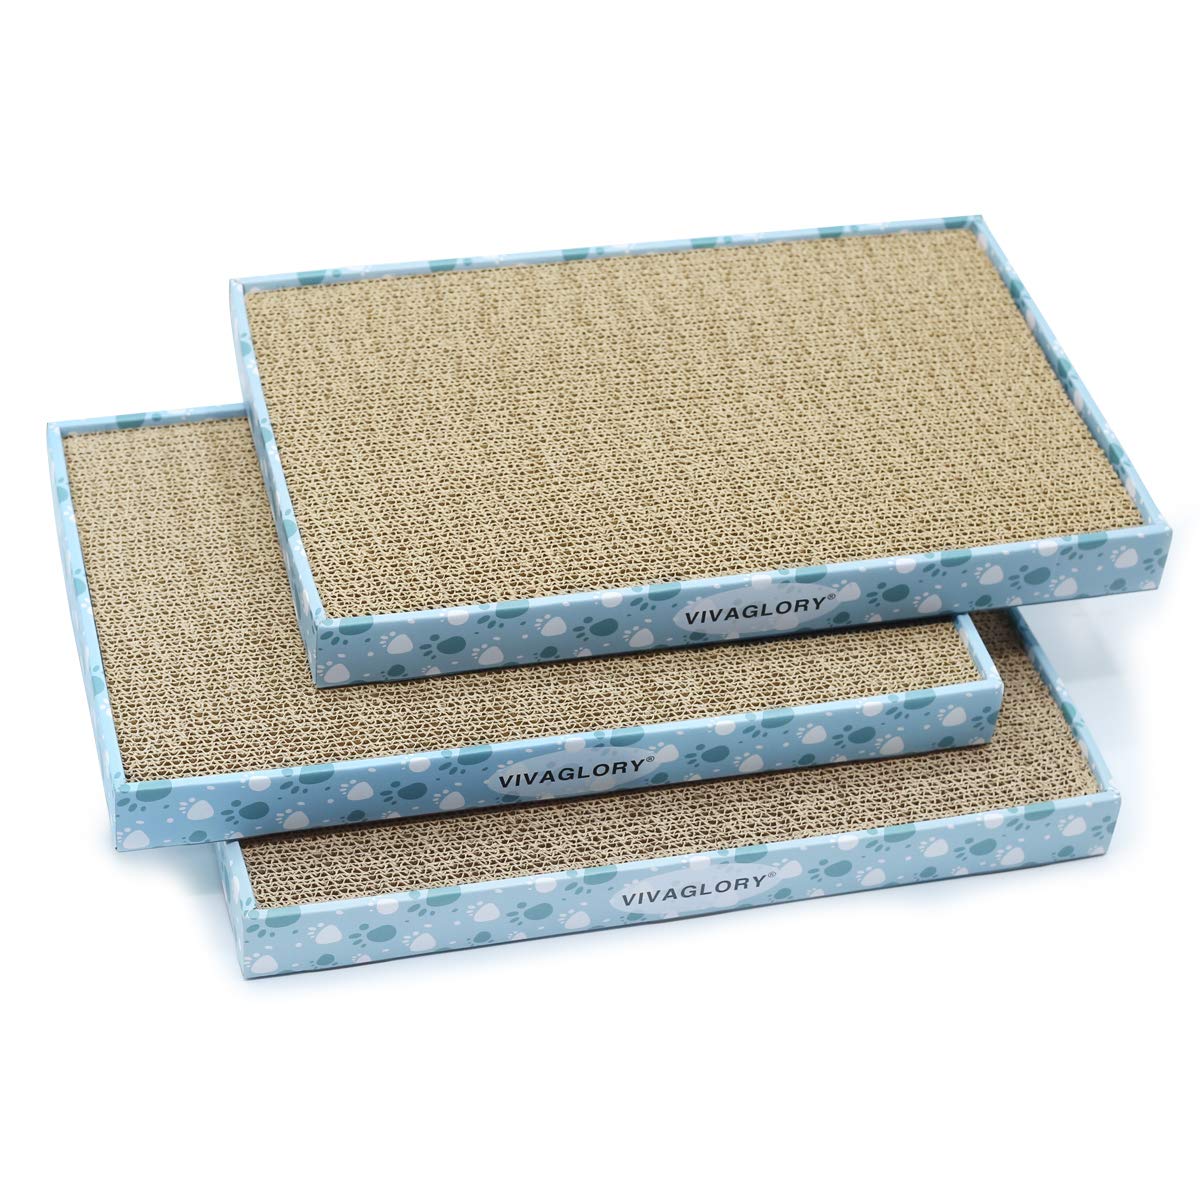 Vivaglory Cat Scratcher Extra Wide with Box of 3 Pack